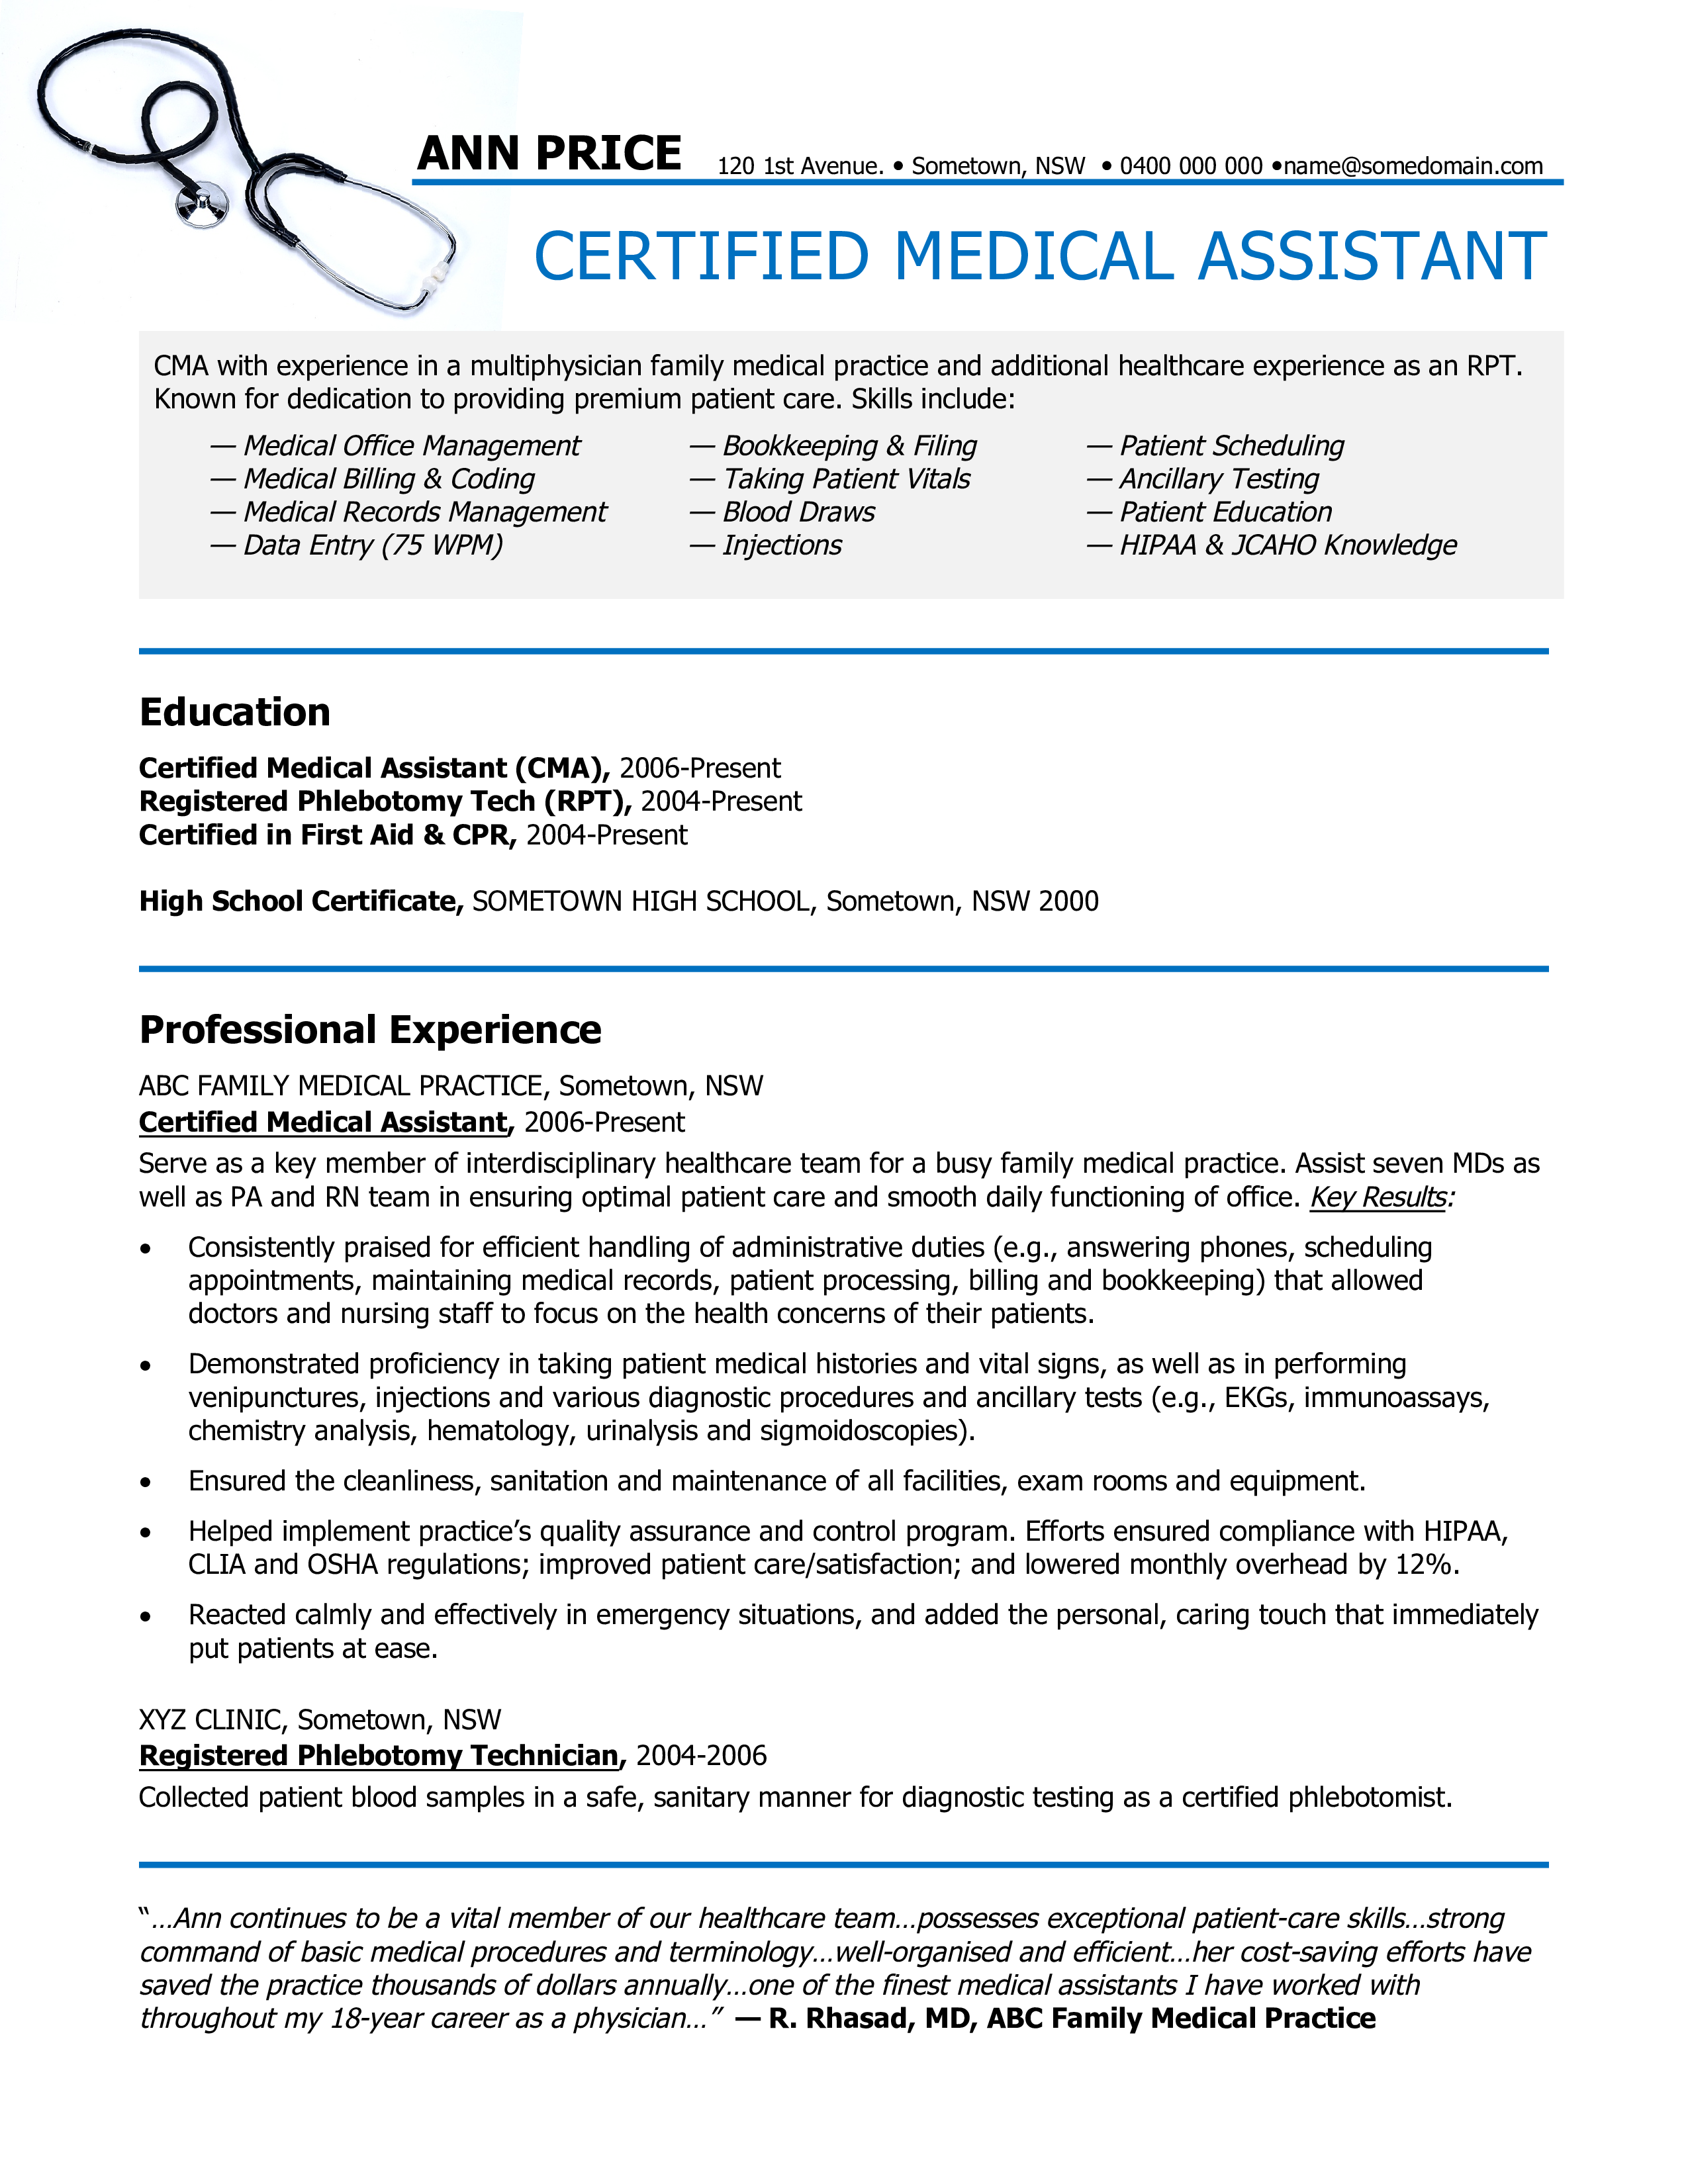 Certified Medical Assistant Resume Sample Templates at